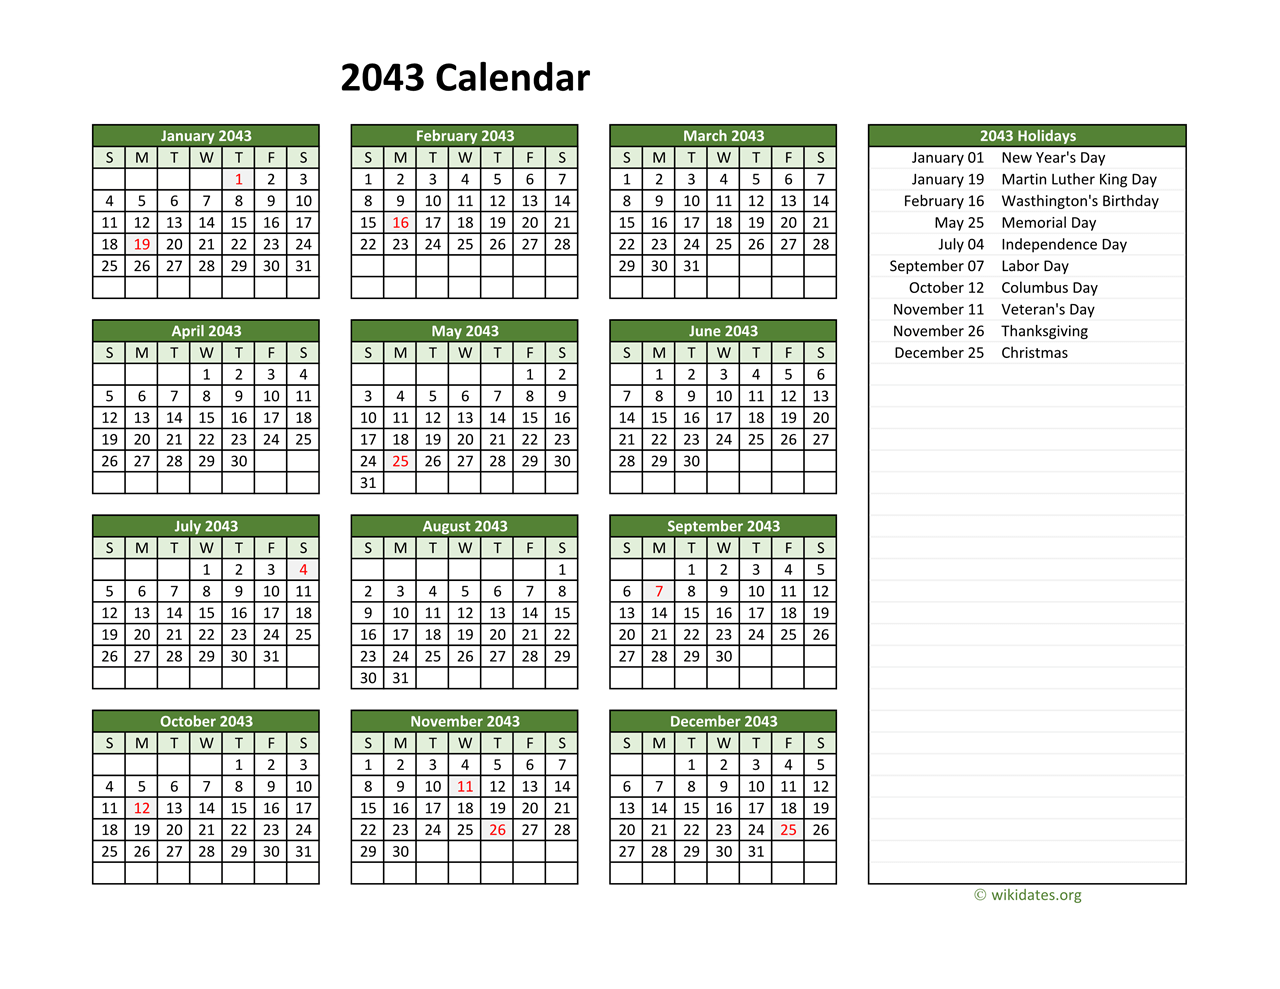 Printable 2043 Calendar with Federal Holidays | WikiDates.org